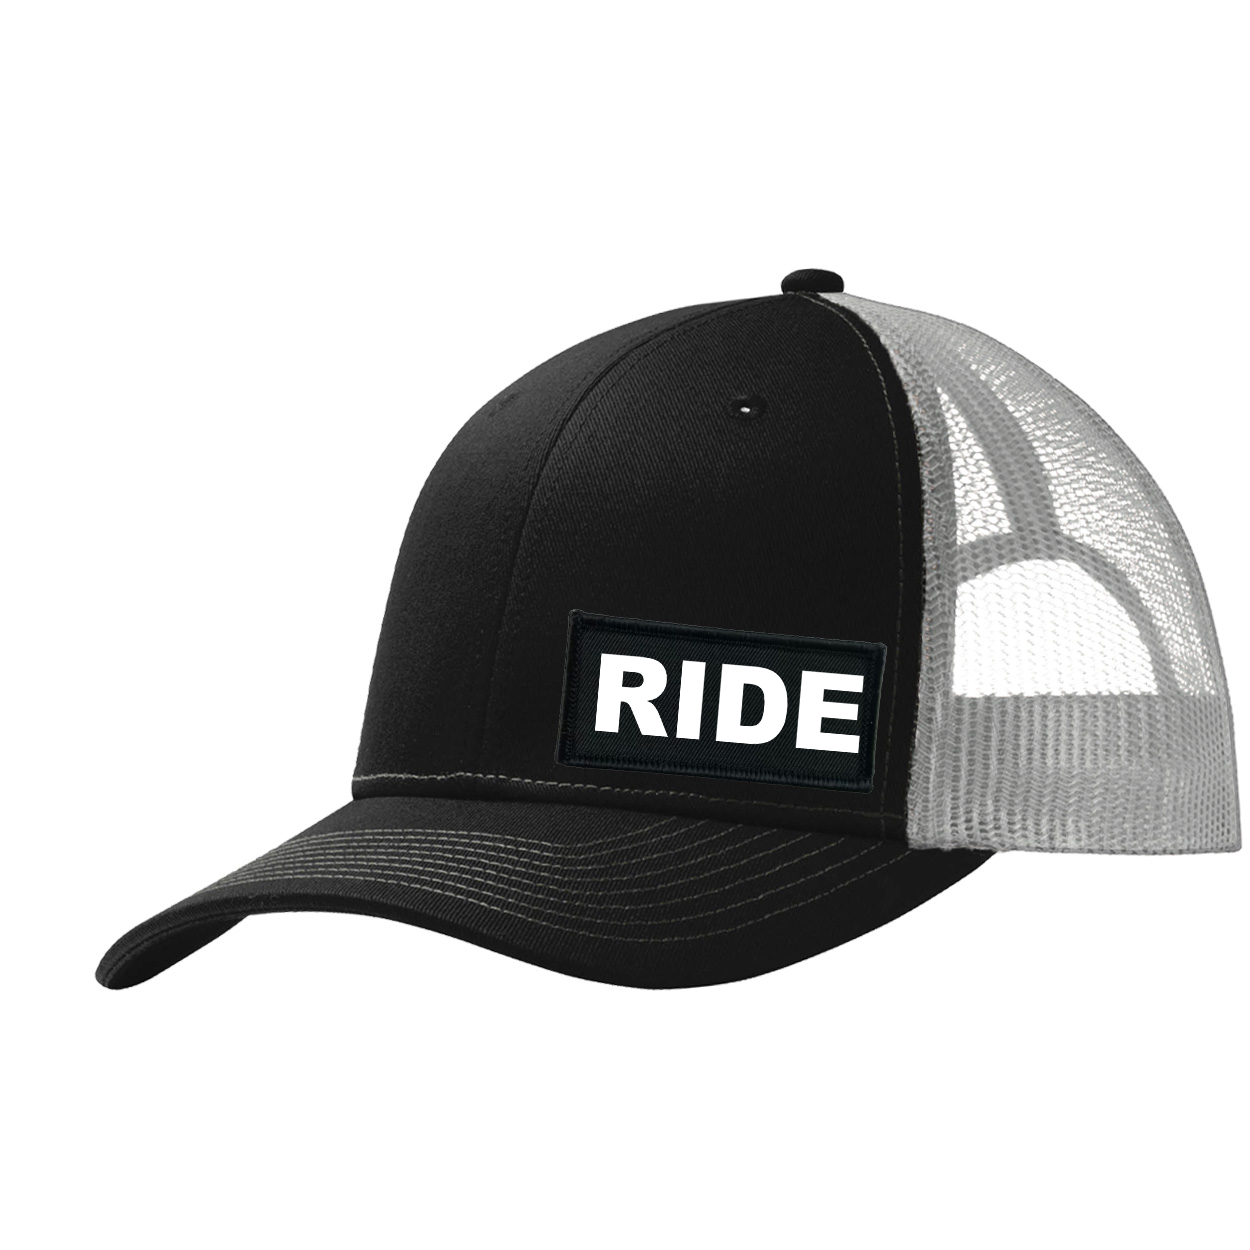 Ride Brand Logo Night Out Woven Patch Snapback Trucker Hat Black/Gray